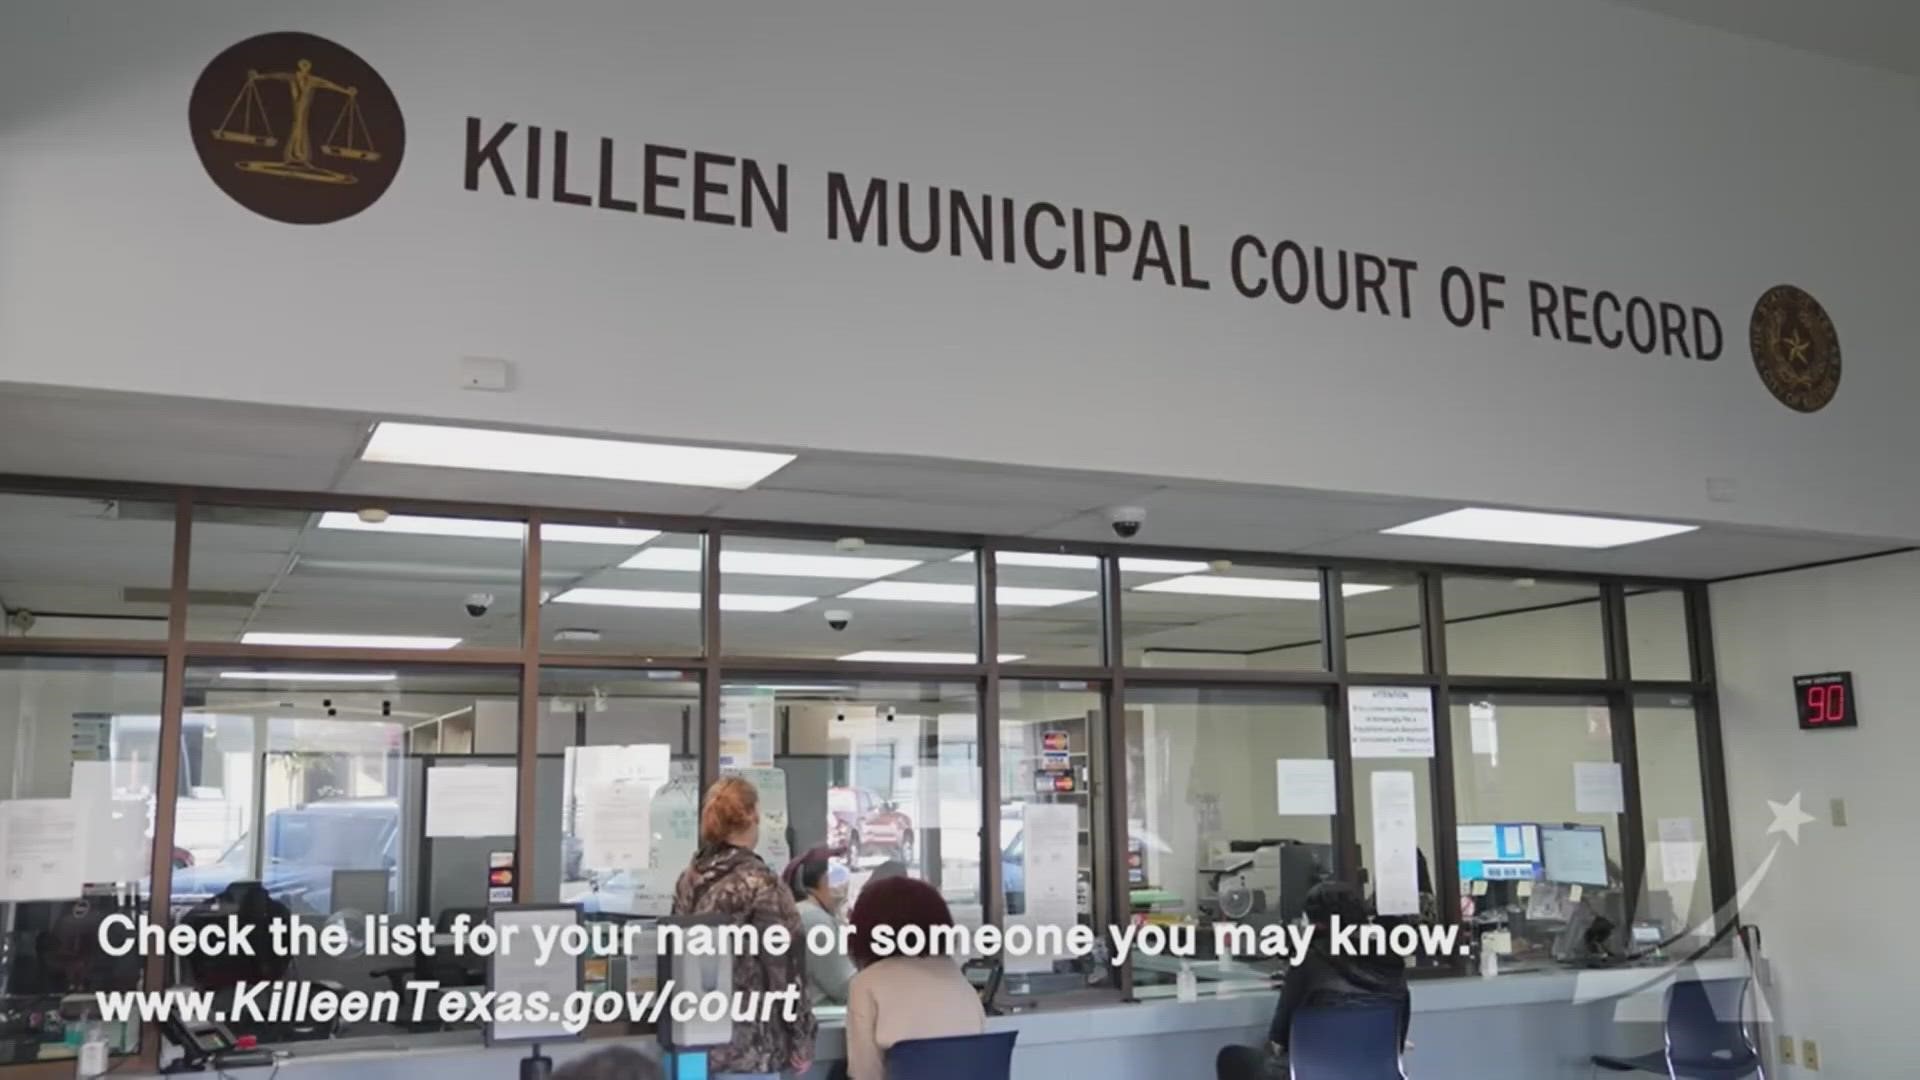 Starting Monday Killeen officers will start arresting people who have active warrants